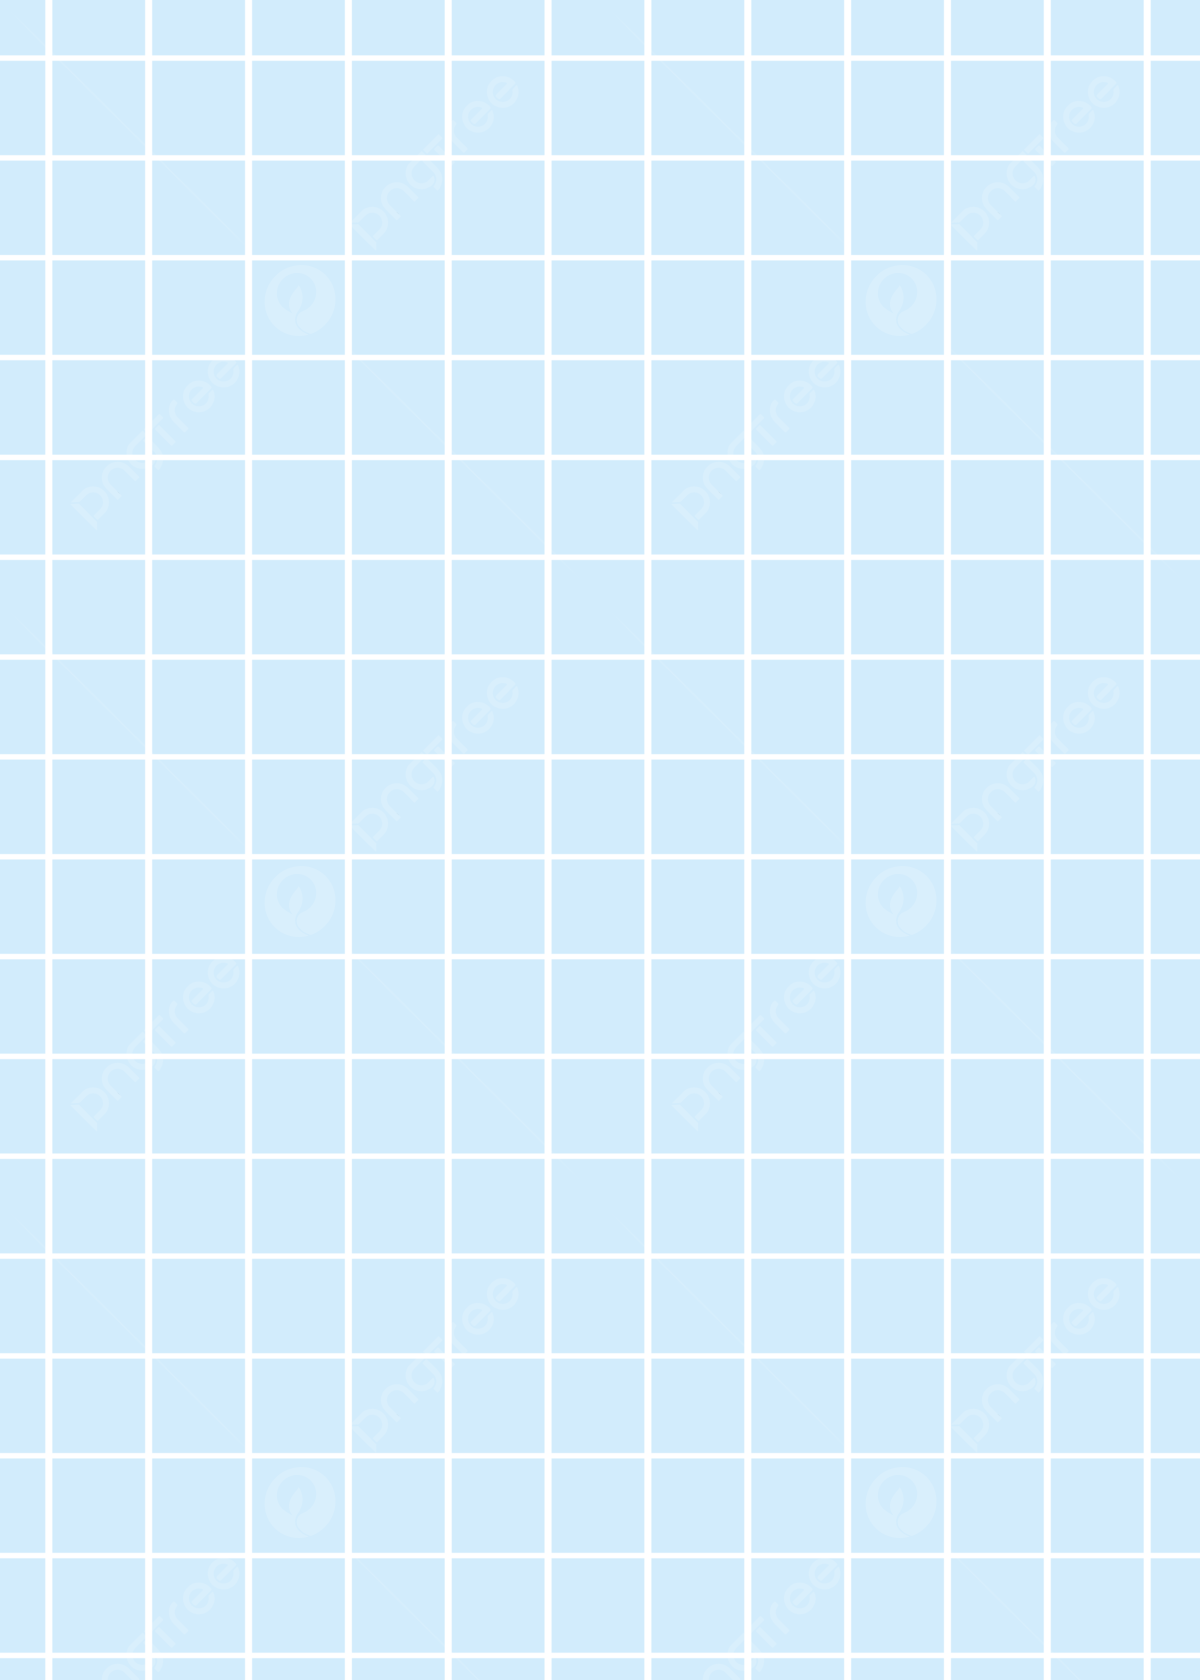 A blue and white grid background - Pastel blue